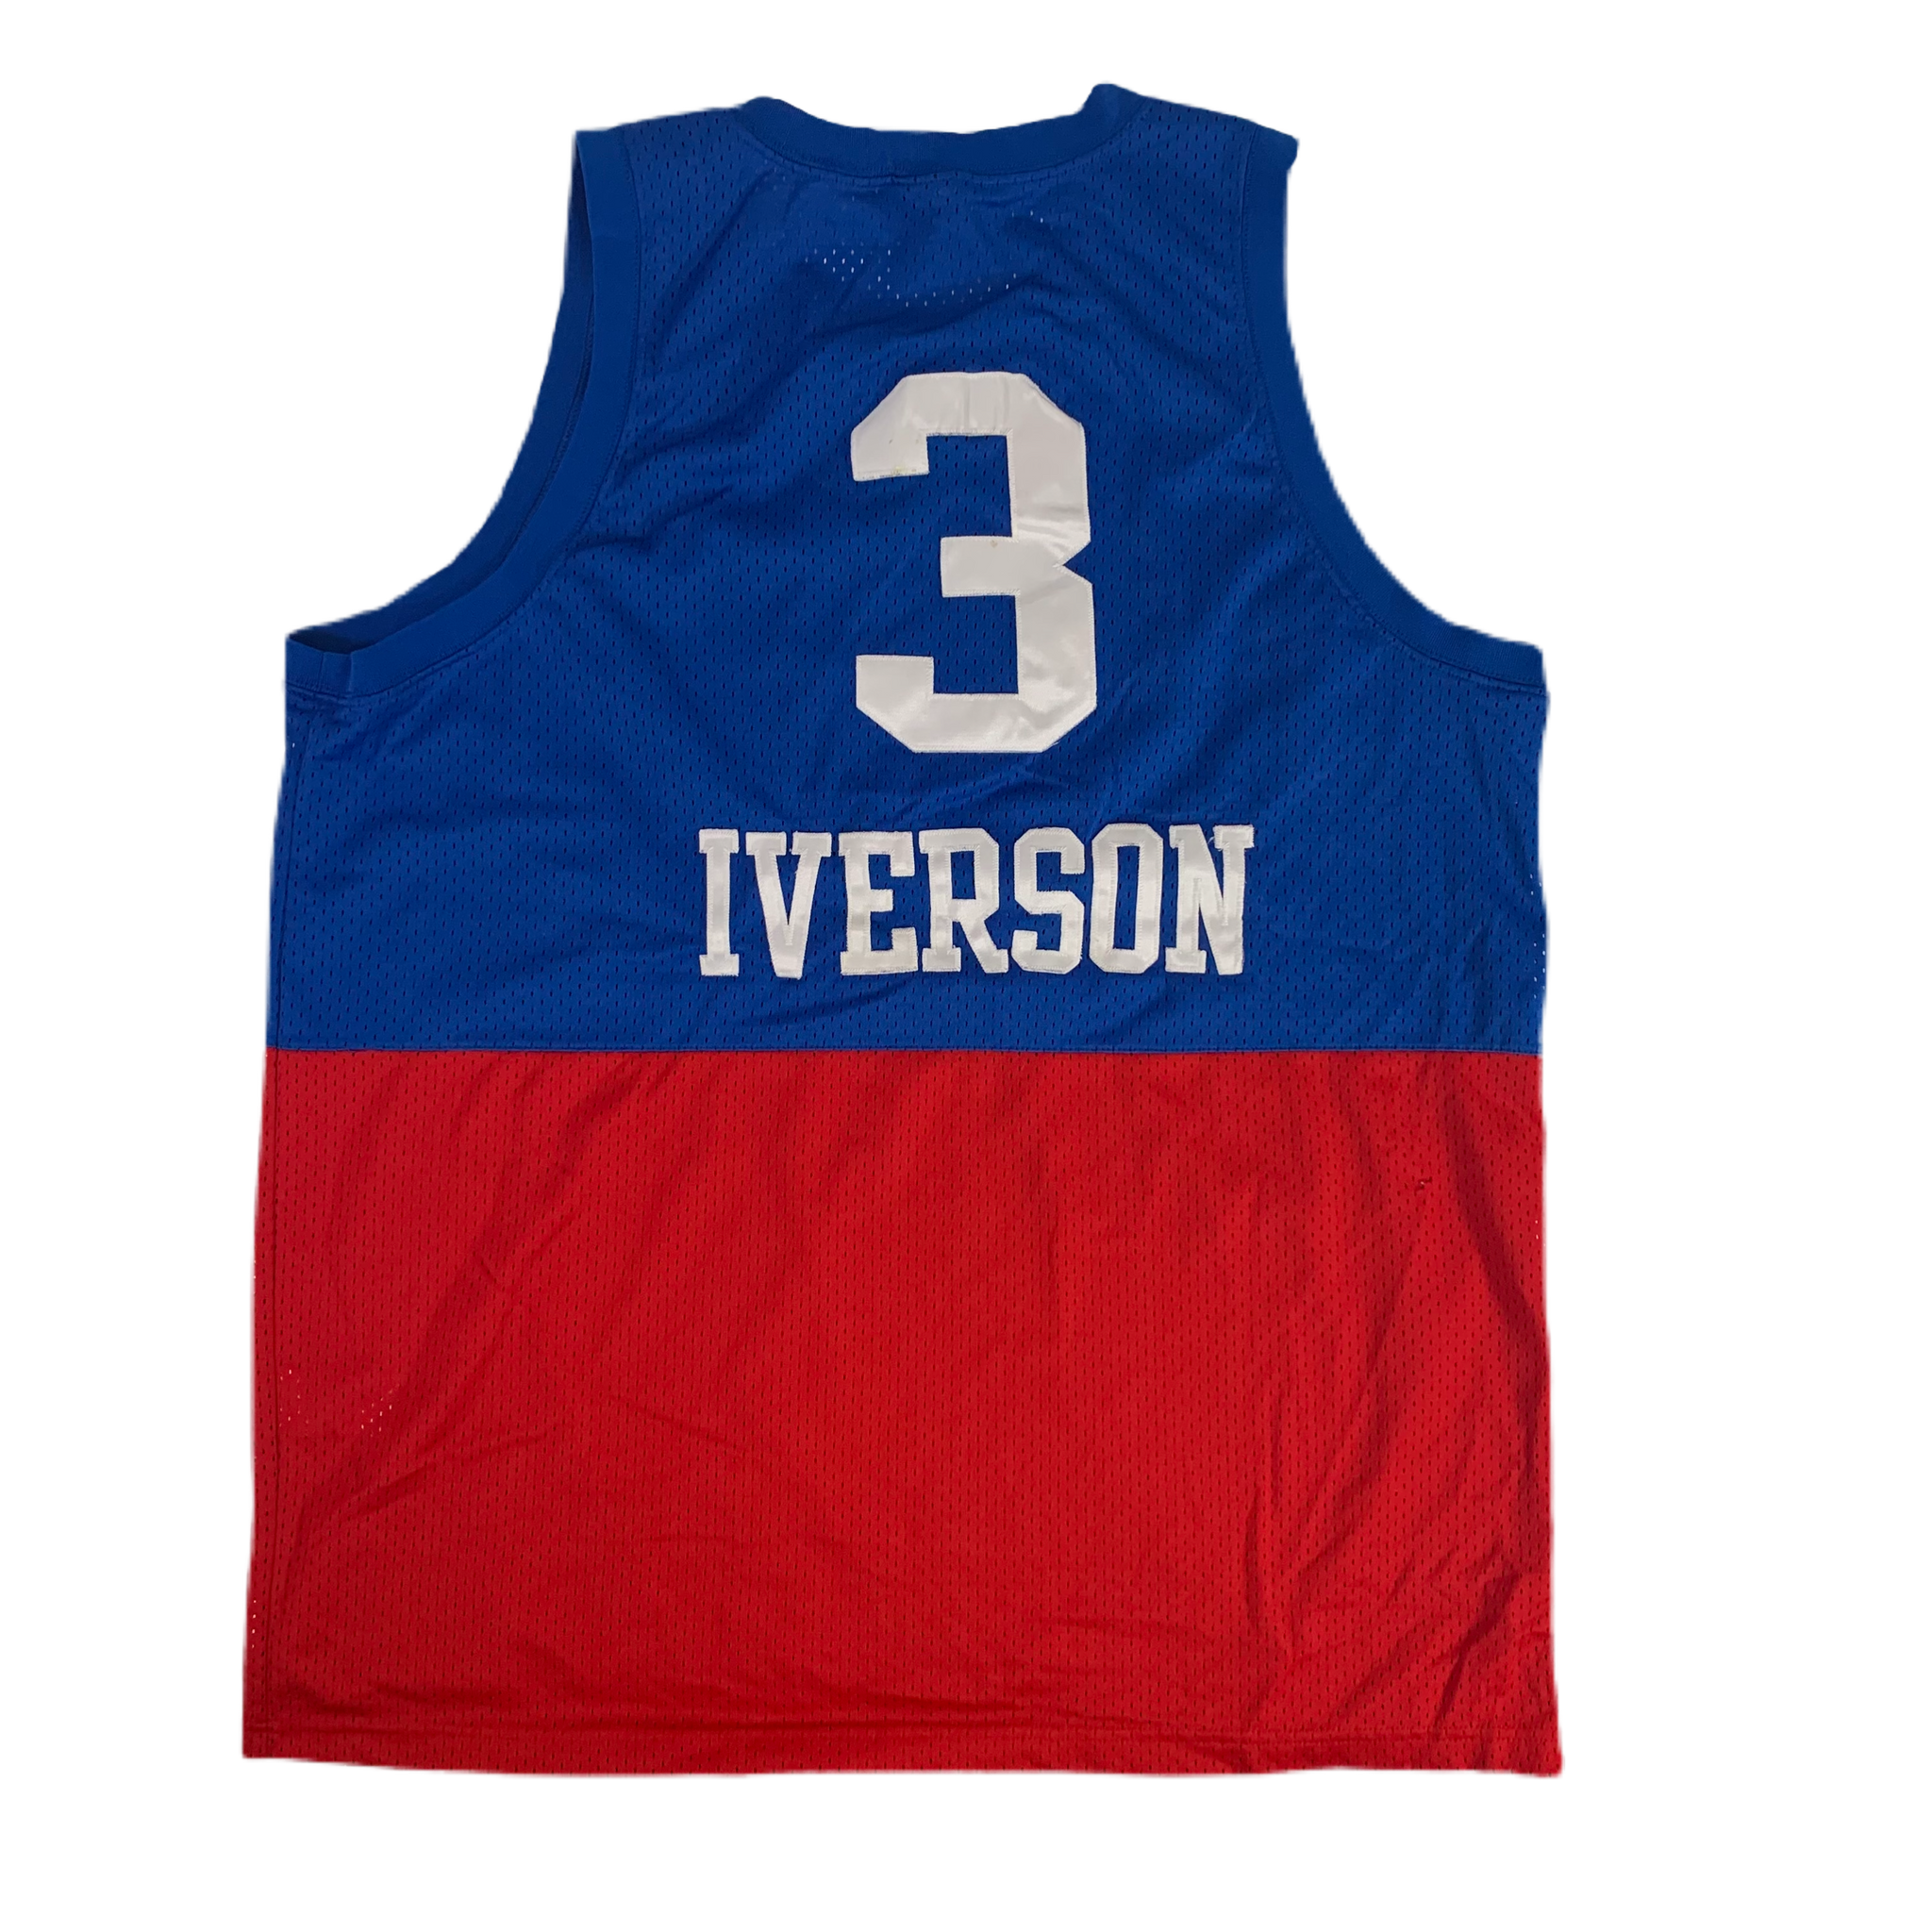 iverson sixers throwback jersey